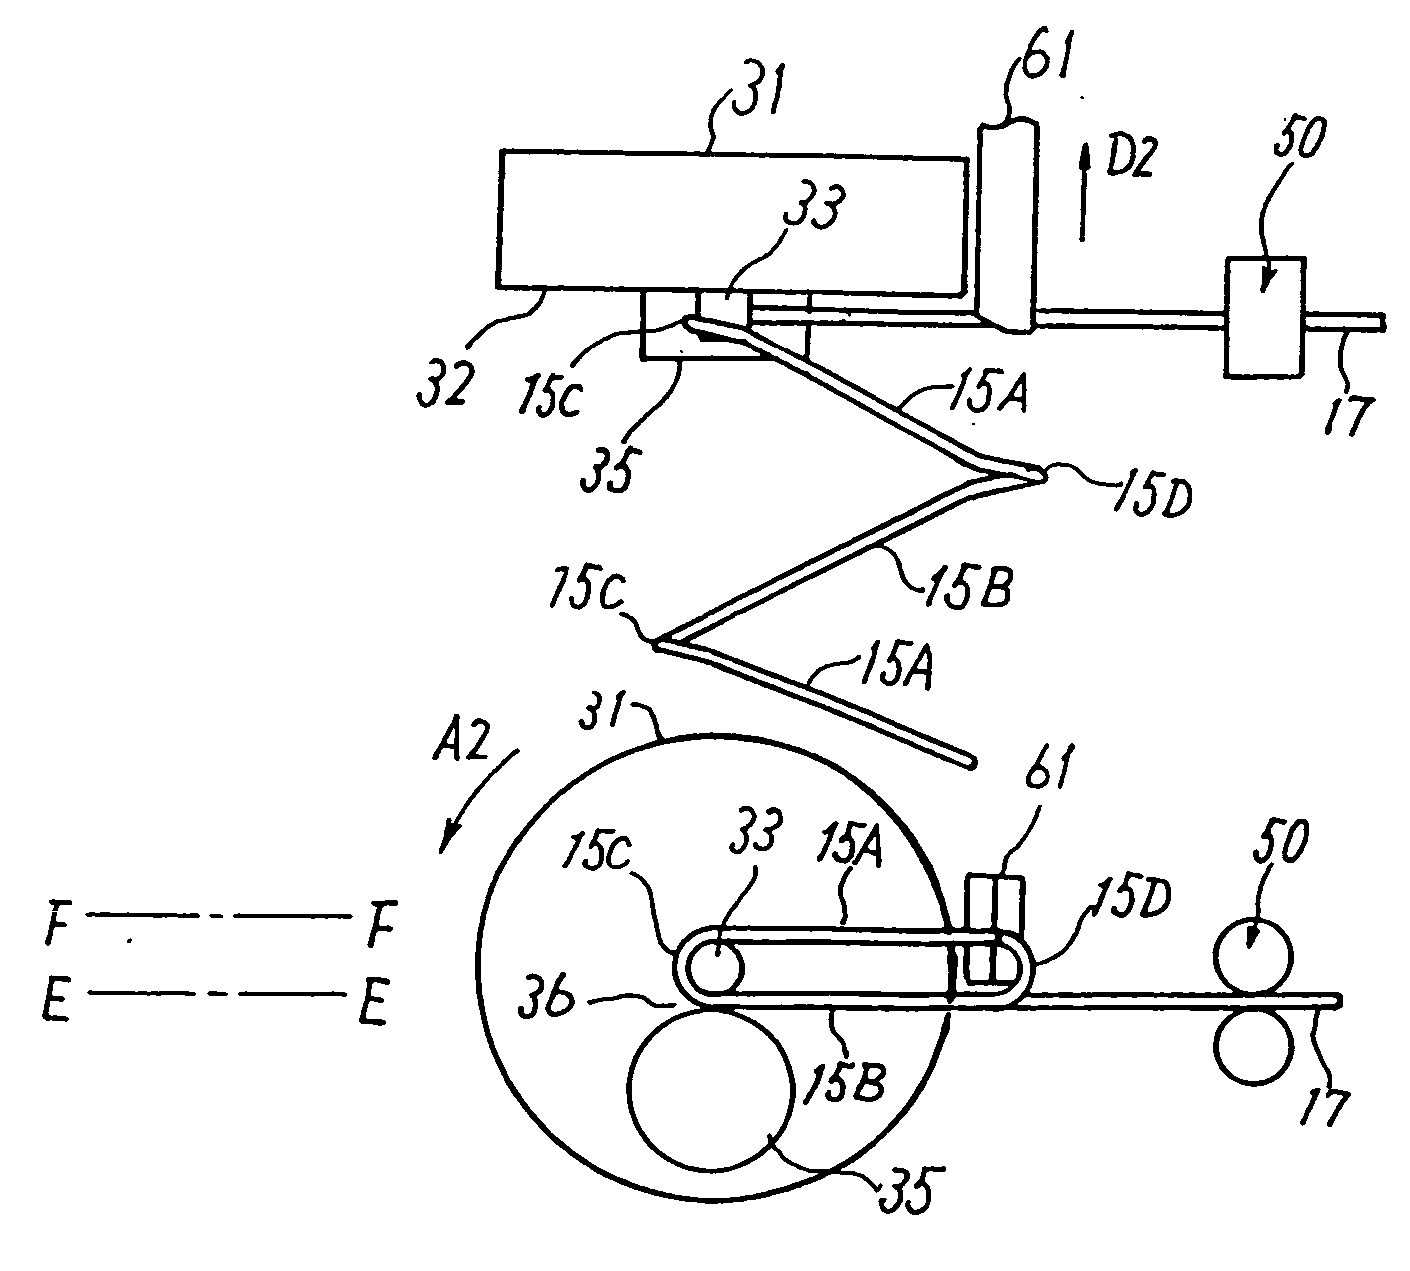 Manufacturing method of a coil assembly